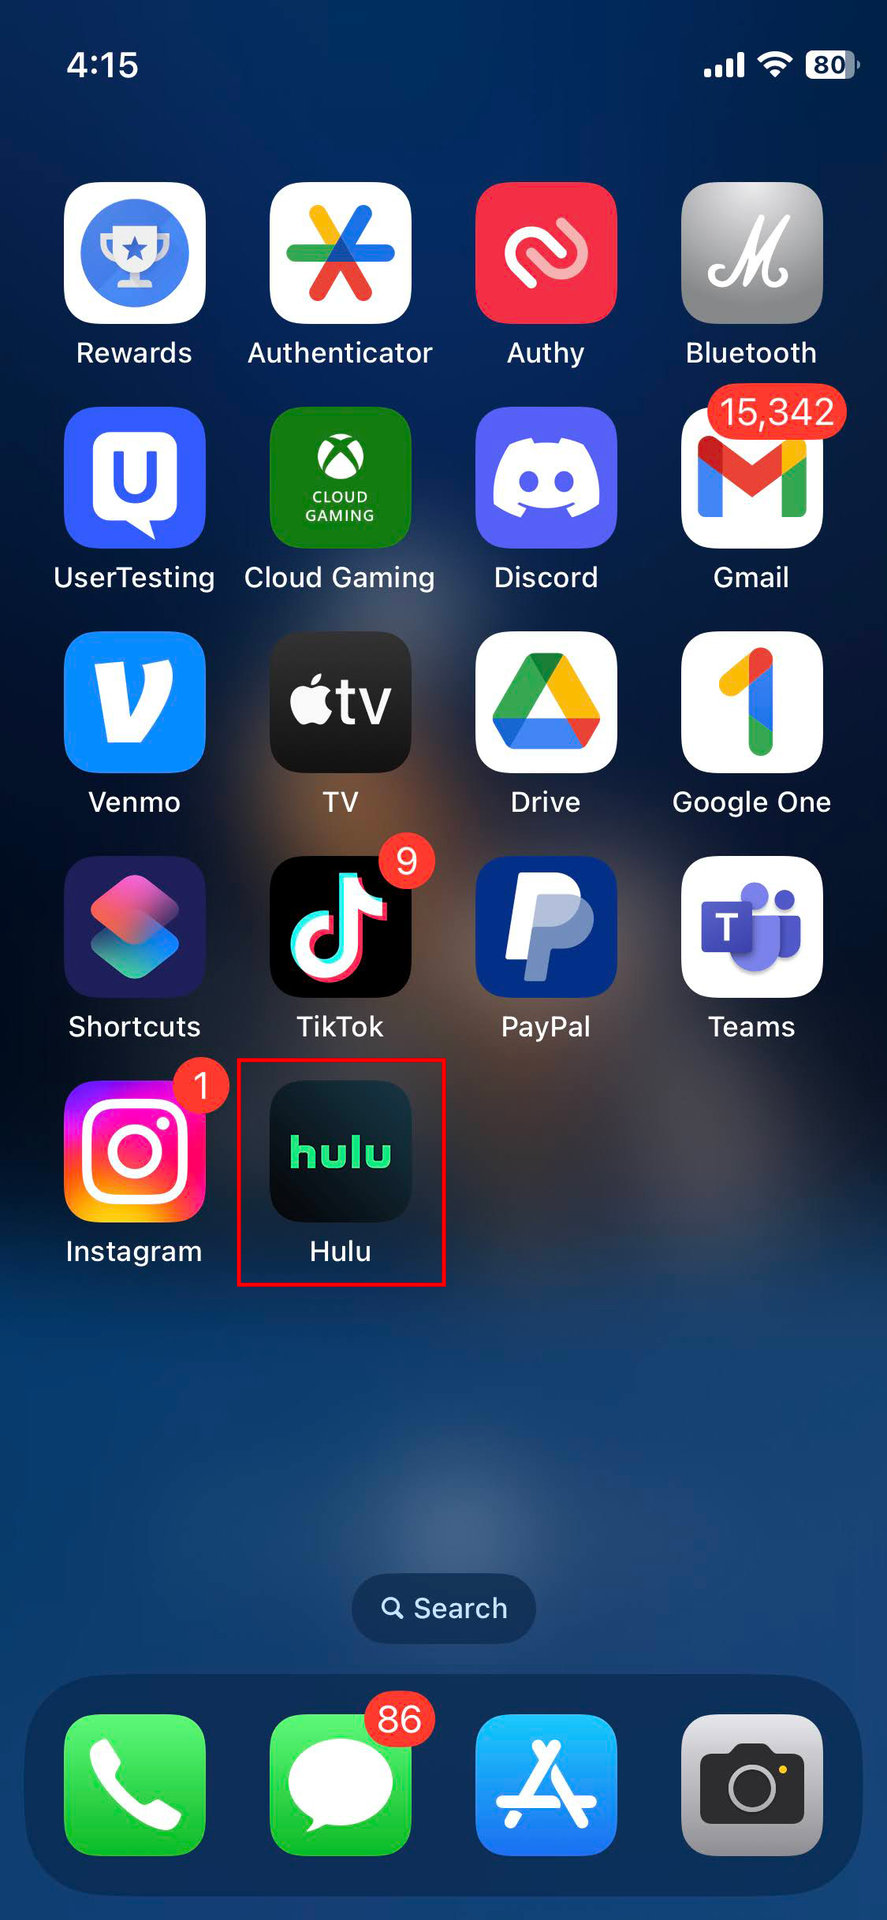 How to uninstall Hulu app on iPhone (1)